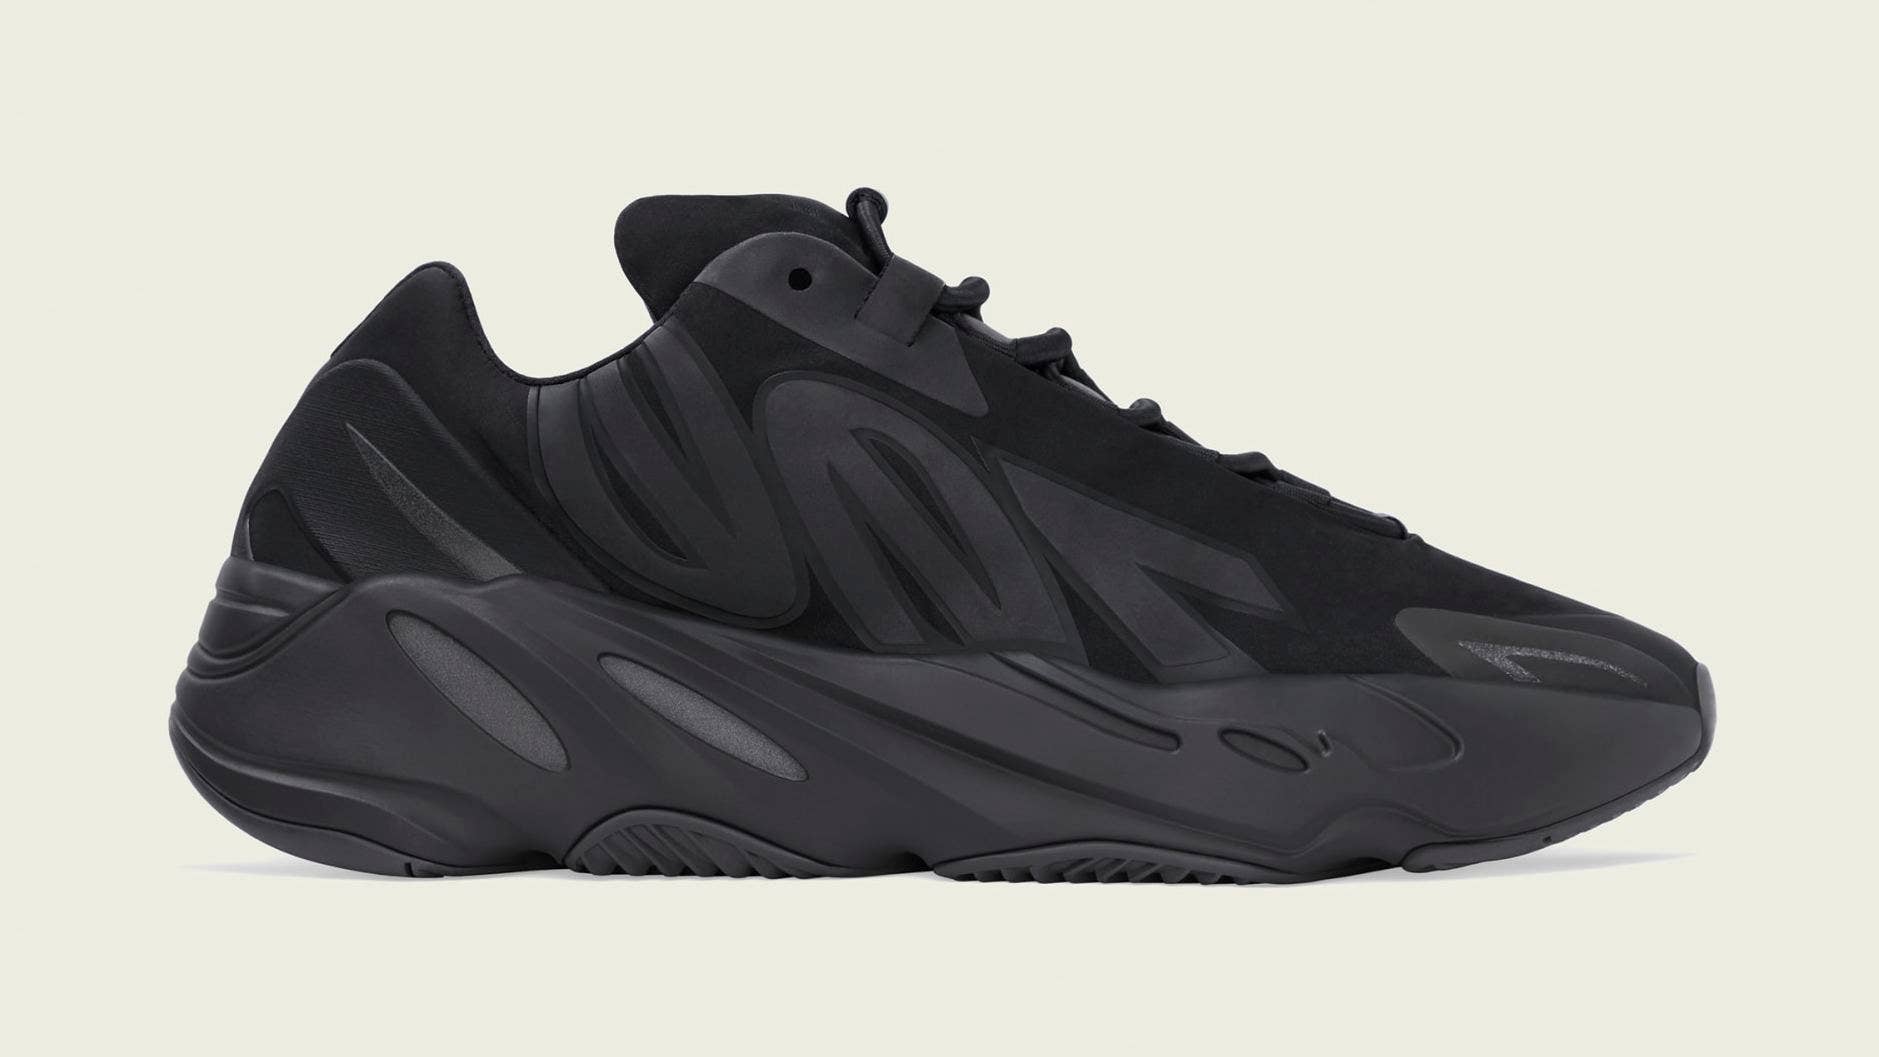 Adidas Yeezy Boost 700 MNVN 'Black' FV4440 Lateral